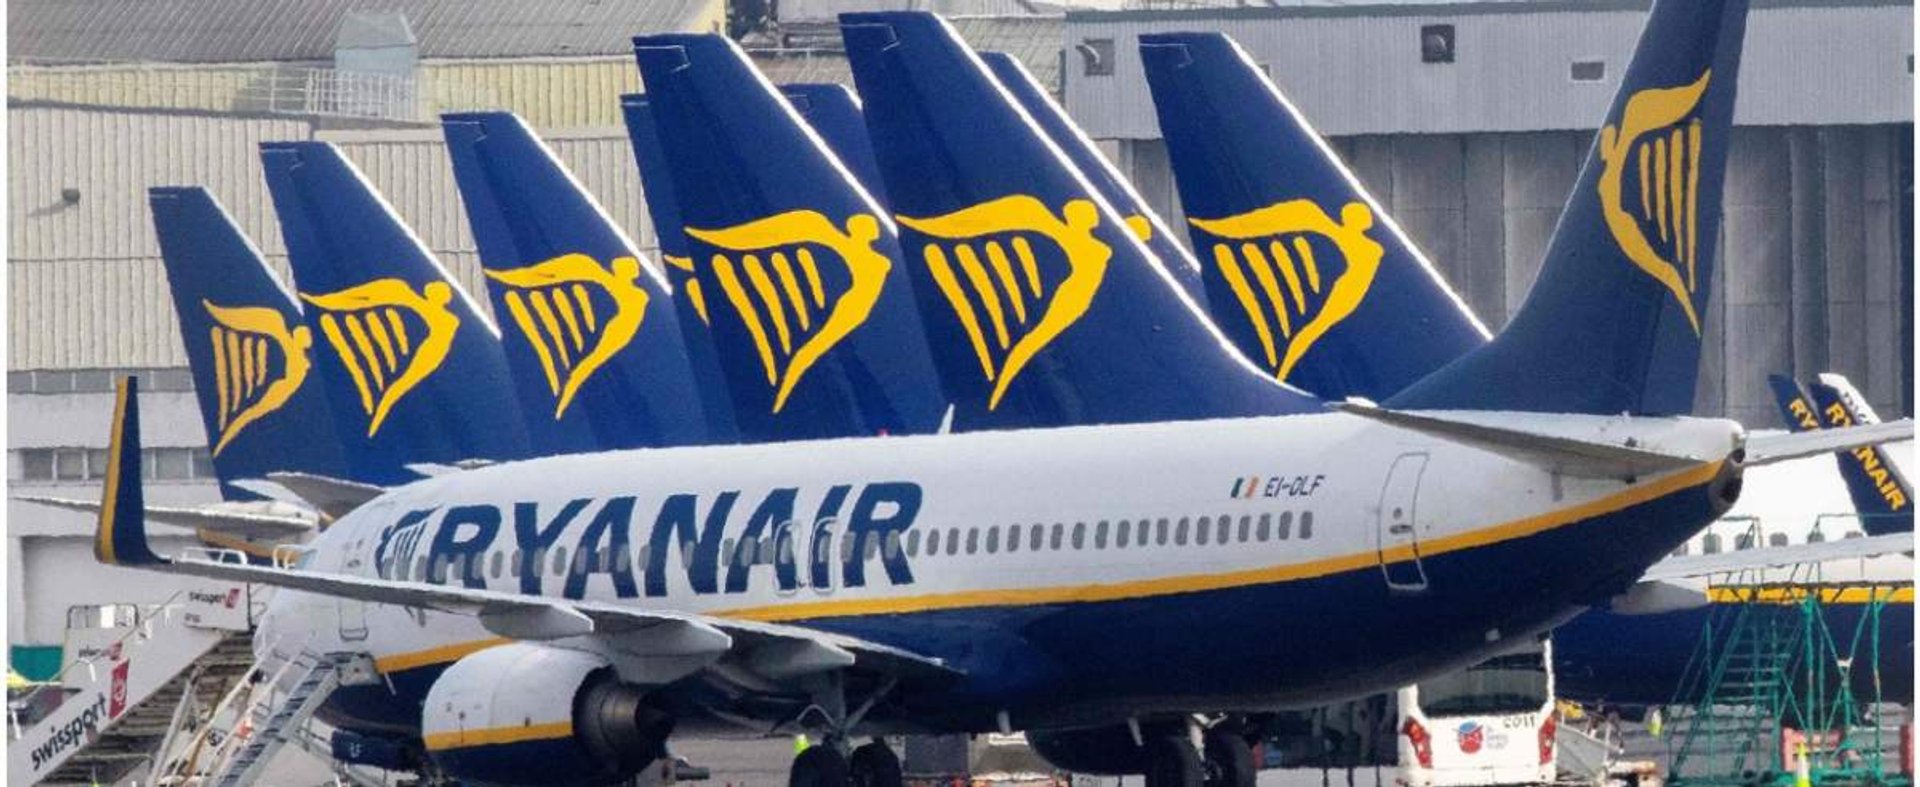 (FILES)This file photograph taken on March 23, 2020, shows Ryanair passenger aircraft on the tarmac at Dublin airport. - Irish low-cost carrier Ryanair said May 1, 2020, that it plans to axe up to 3,000 pilot and cabin crew jobs, with air transport paraly